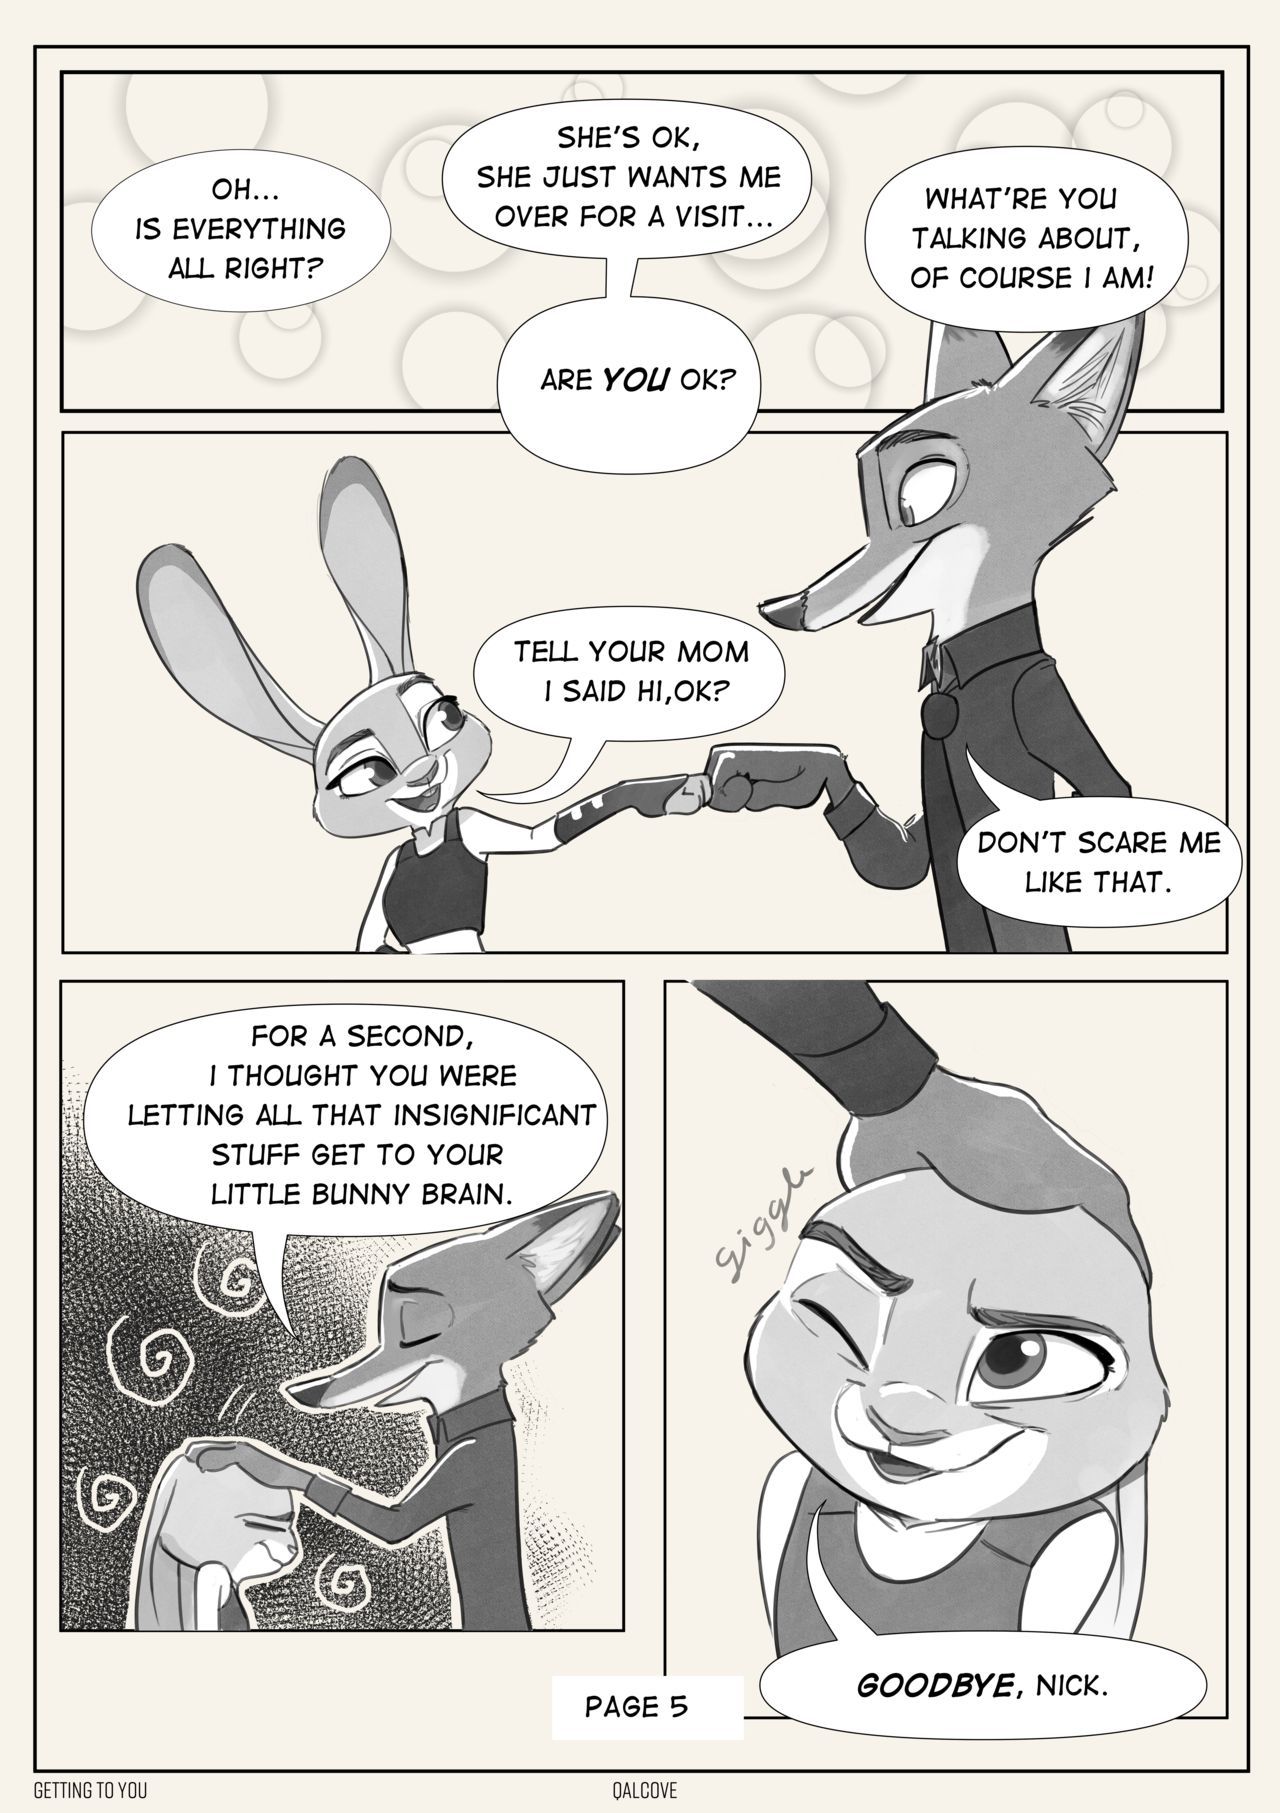 [Qalcove] Getting To You (Zootopia) Ongoing 5